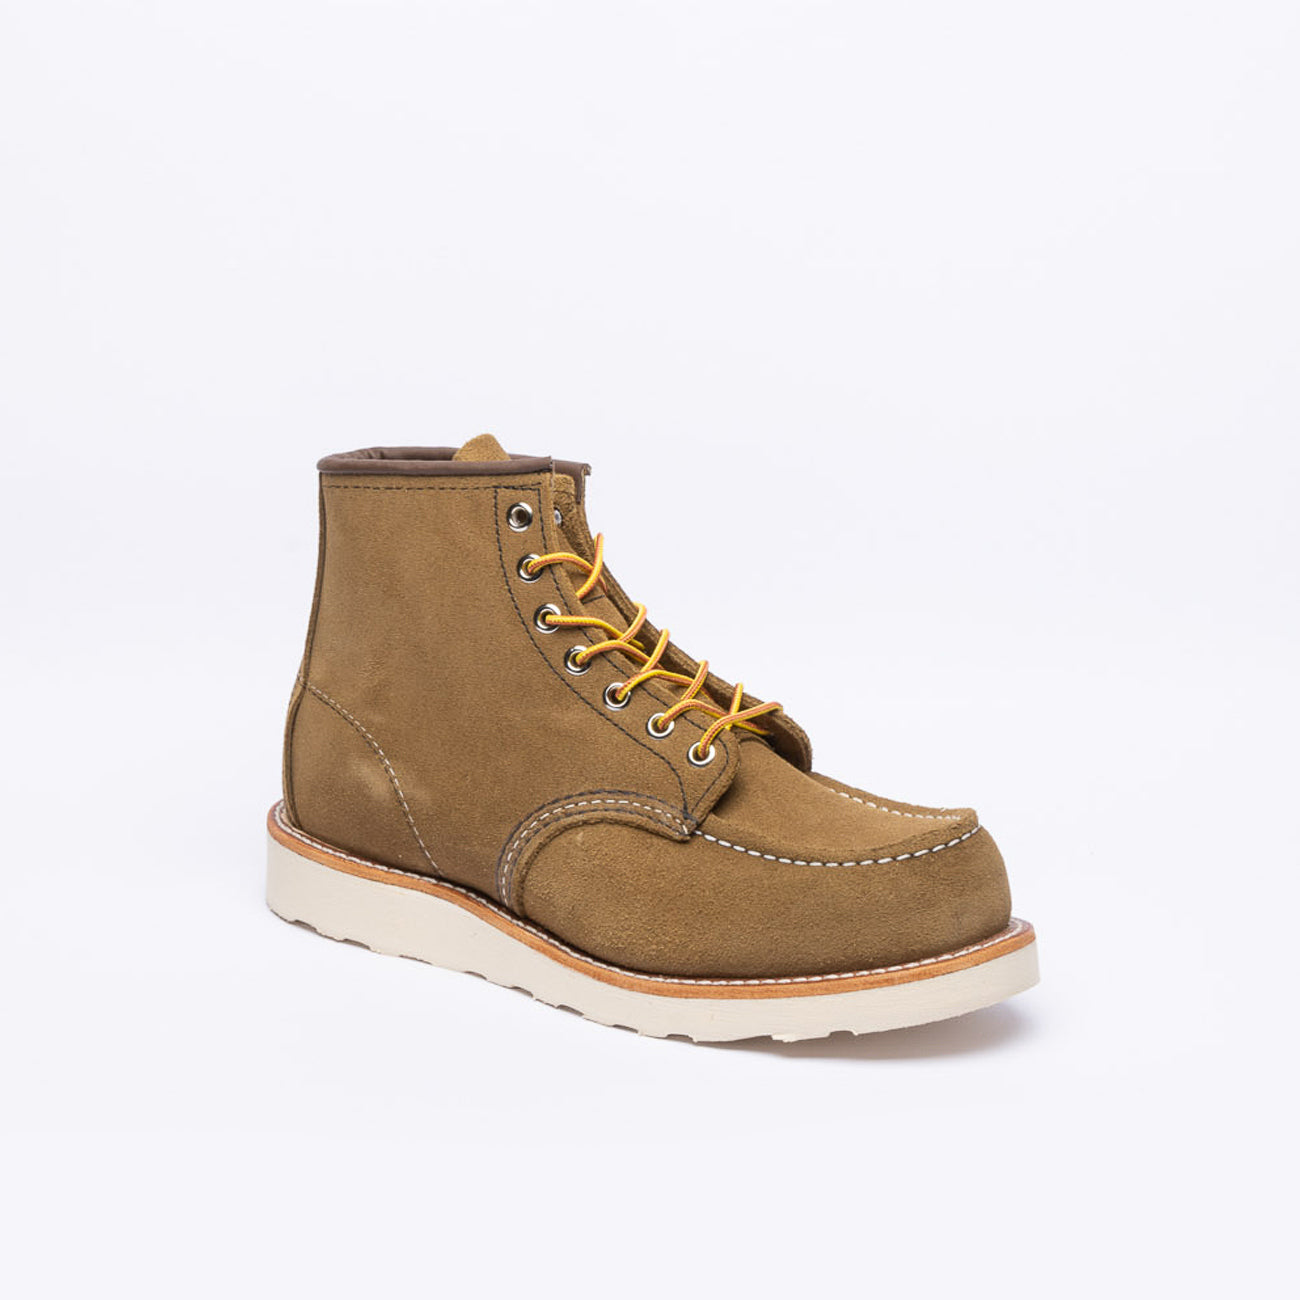 Polacco derby Red Wing 8881 in camoscio beige